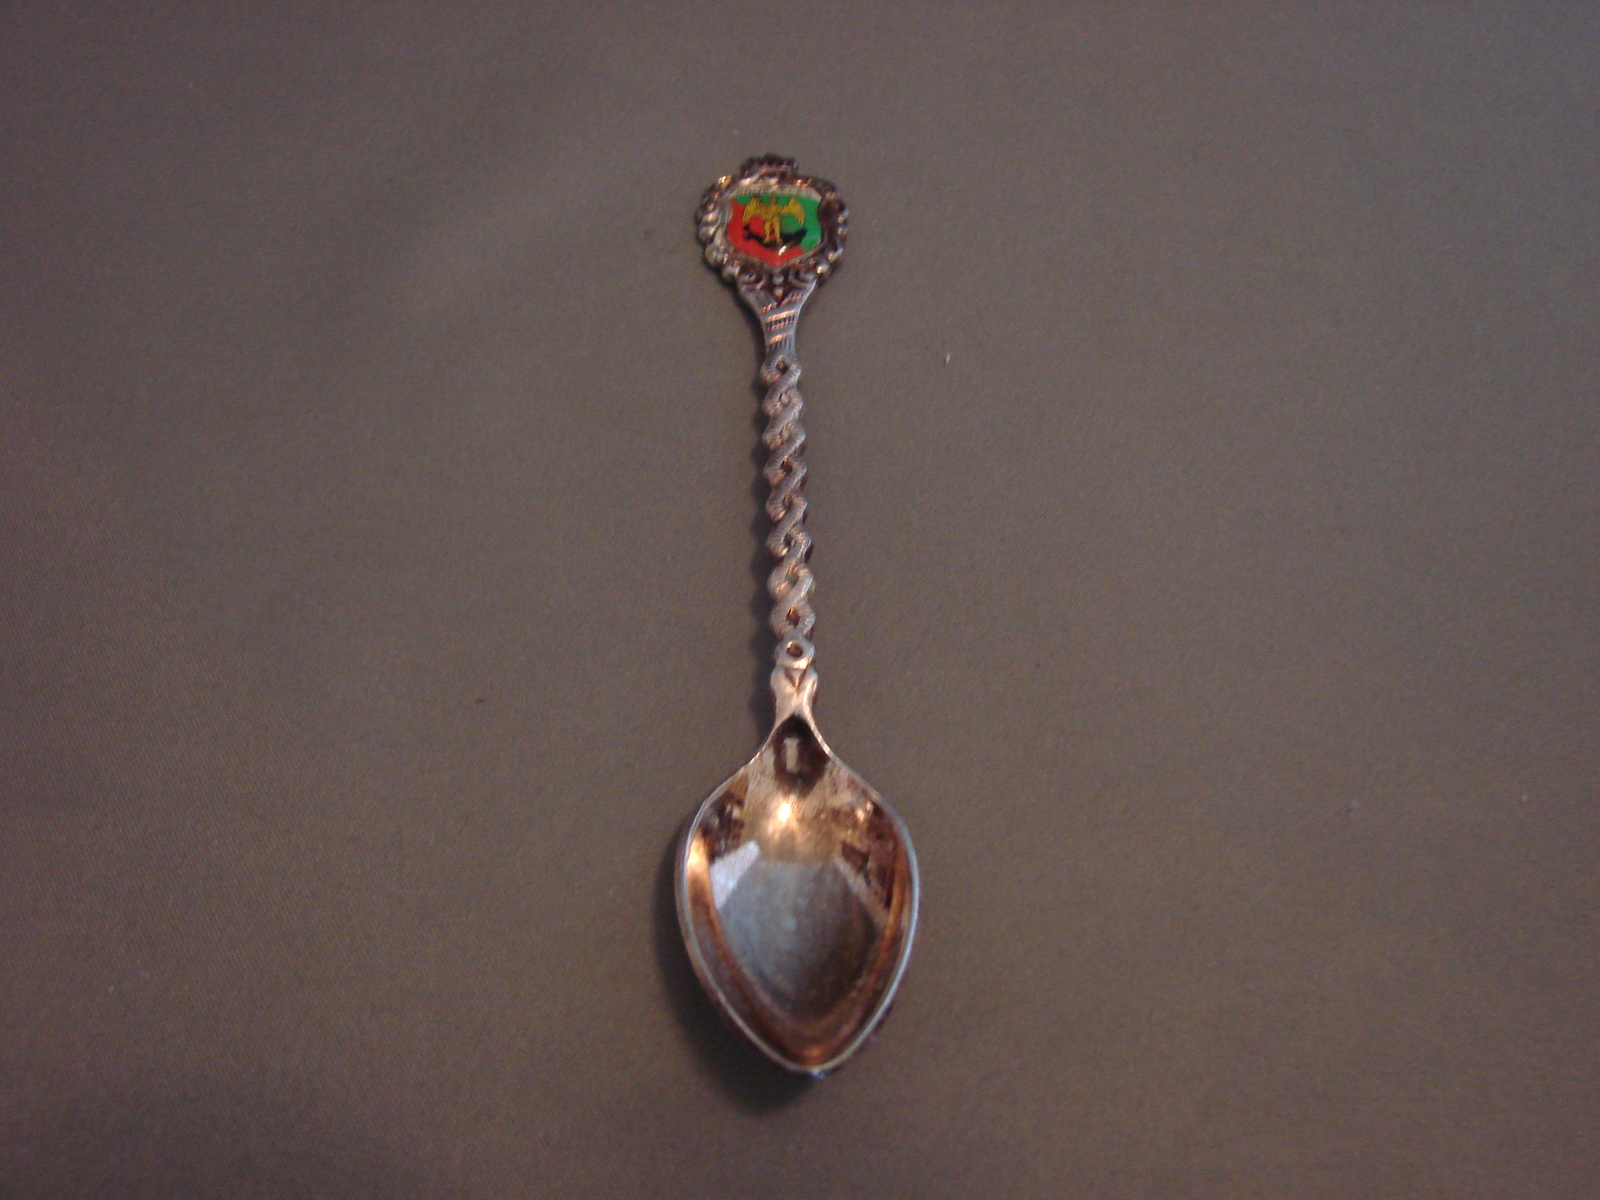 Brussels Spoon Brussels Belgium Souvenir Collector Spoon Collectible Bruxelles S - $7.90